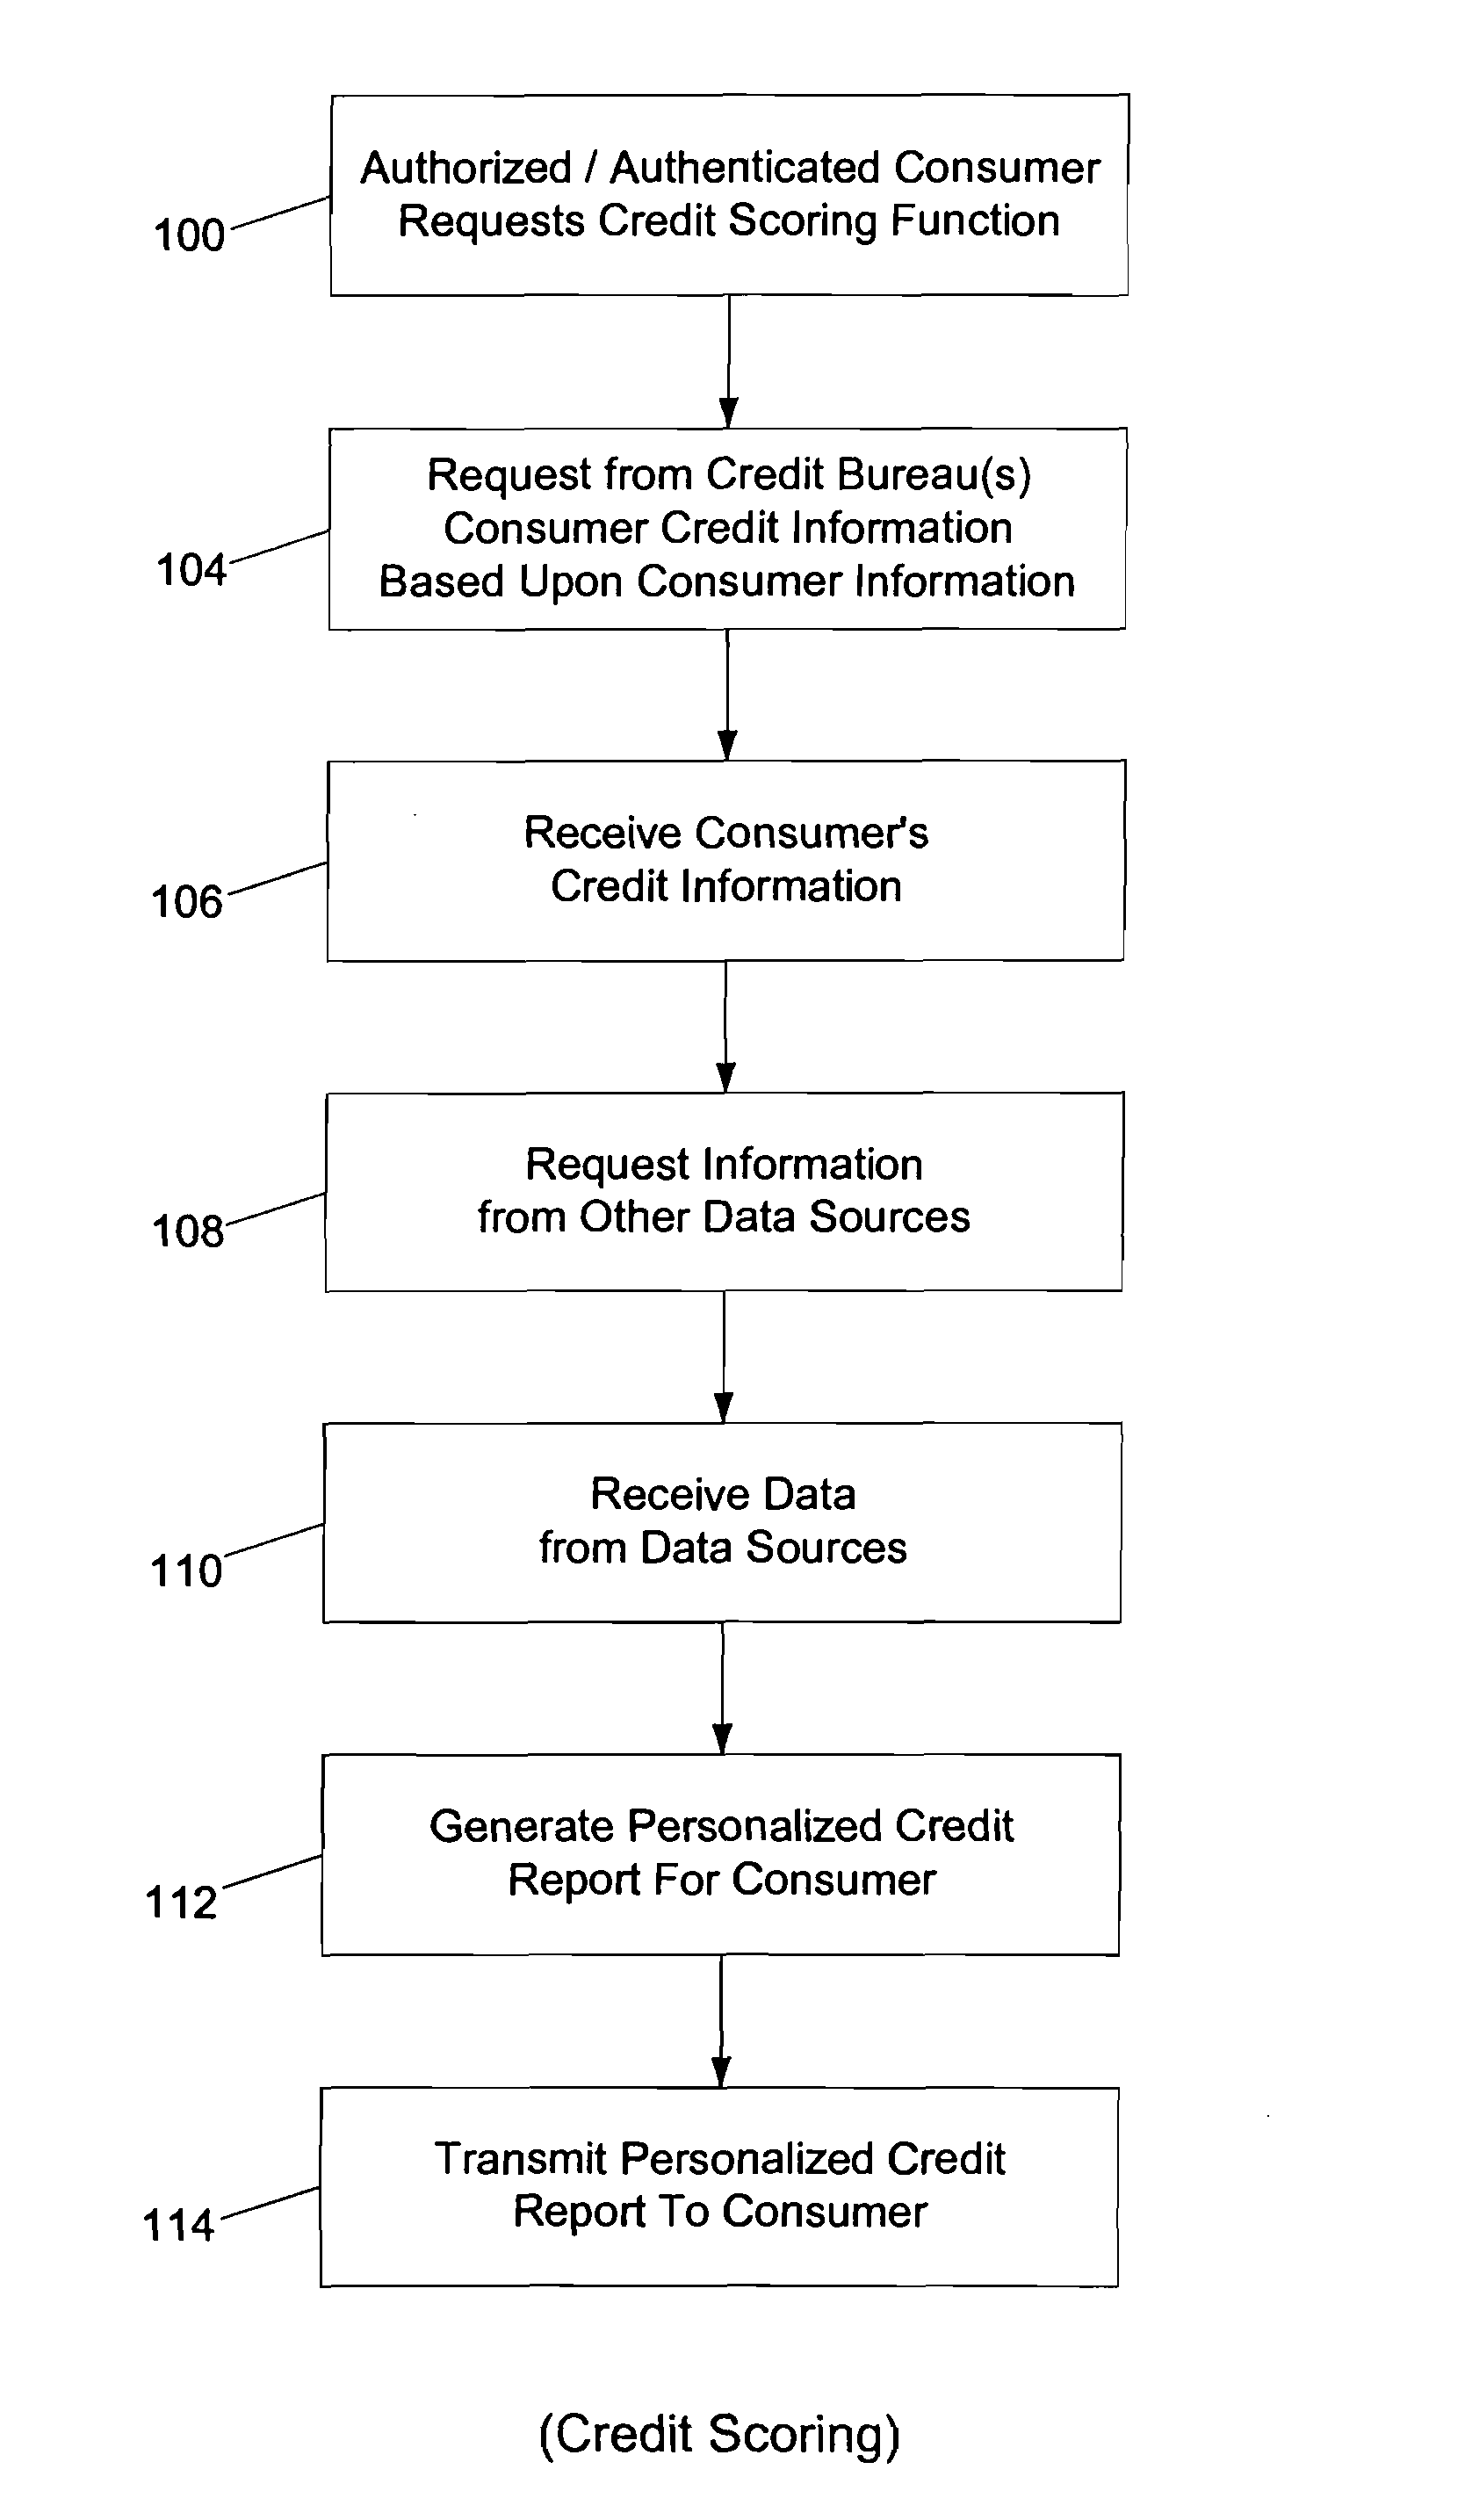 Systems and methods for providing consumers anonymous pre-approved offers from a consumer-selected group of merchants